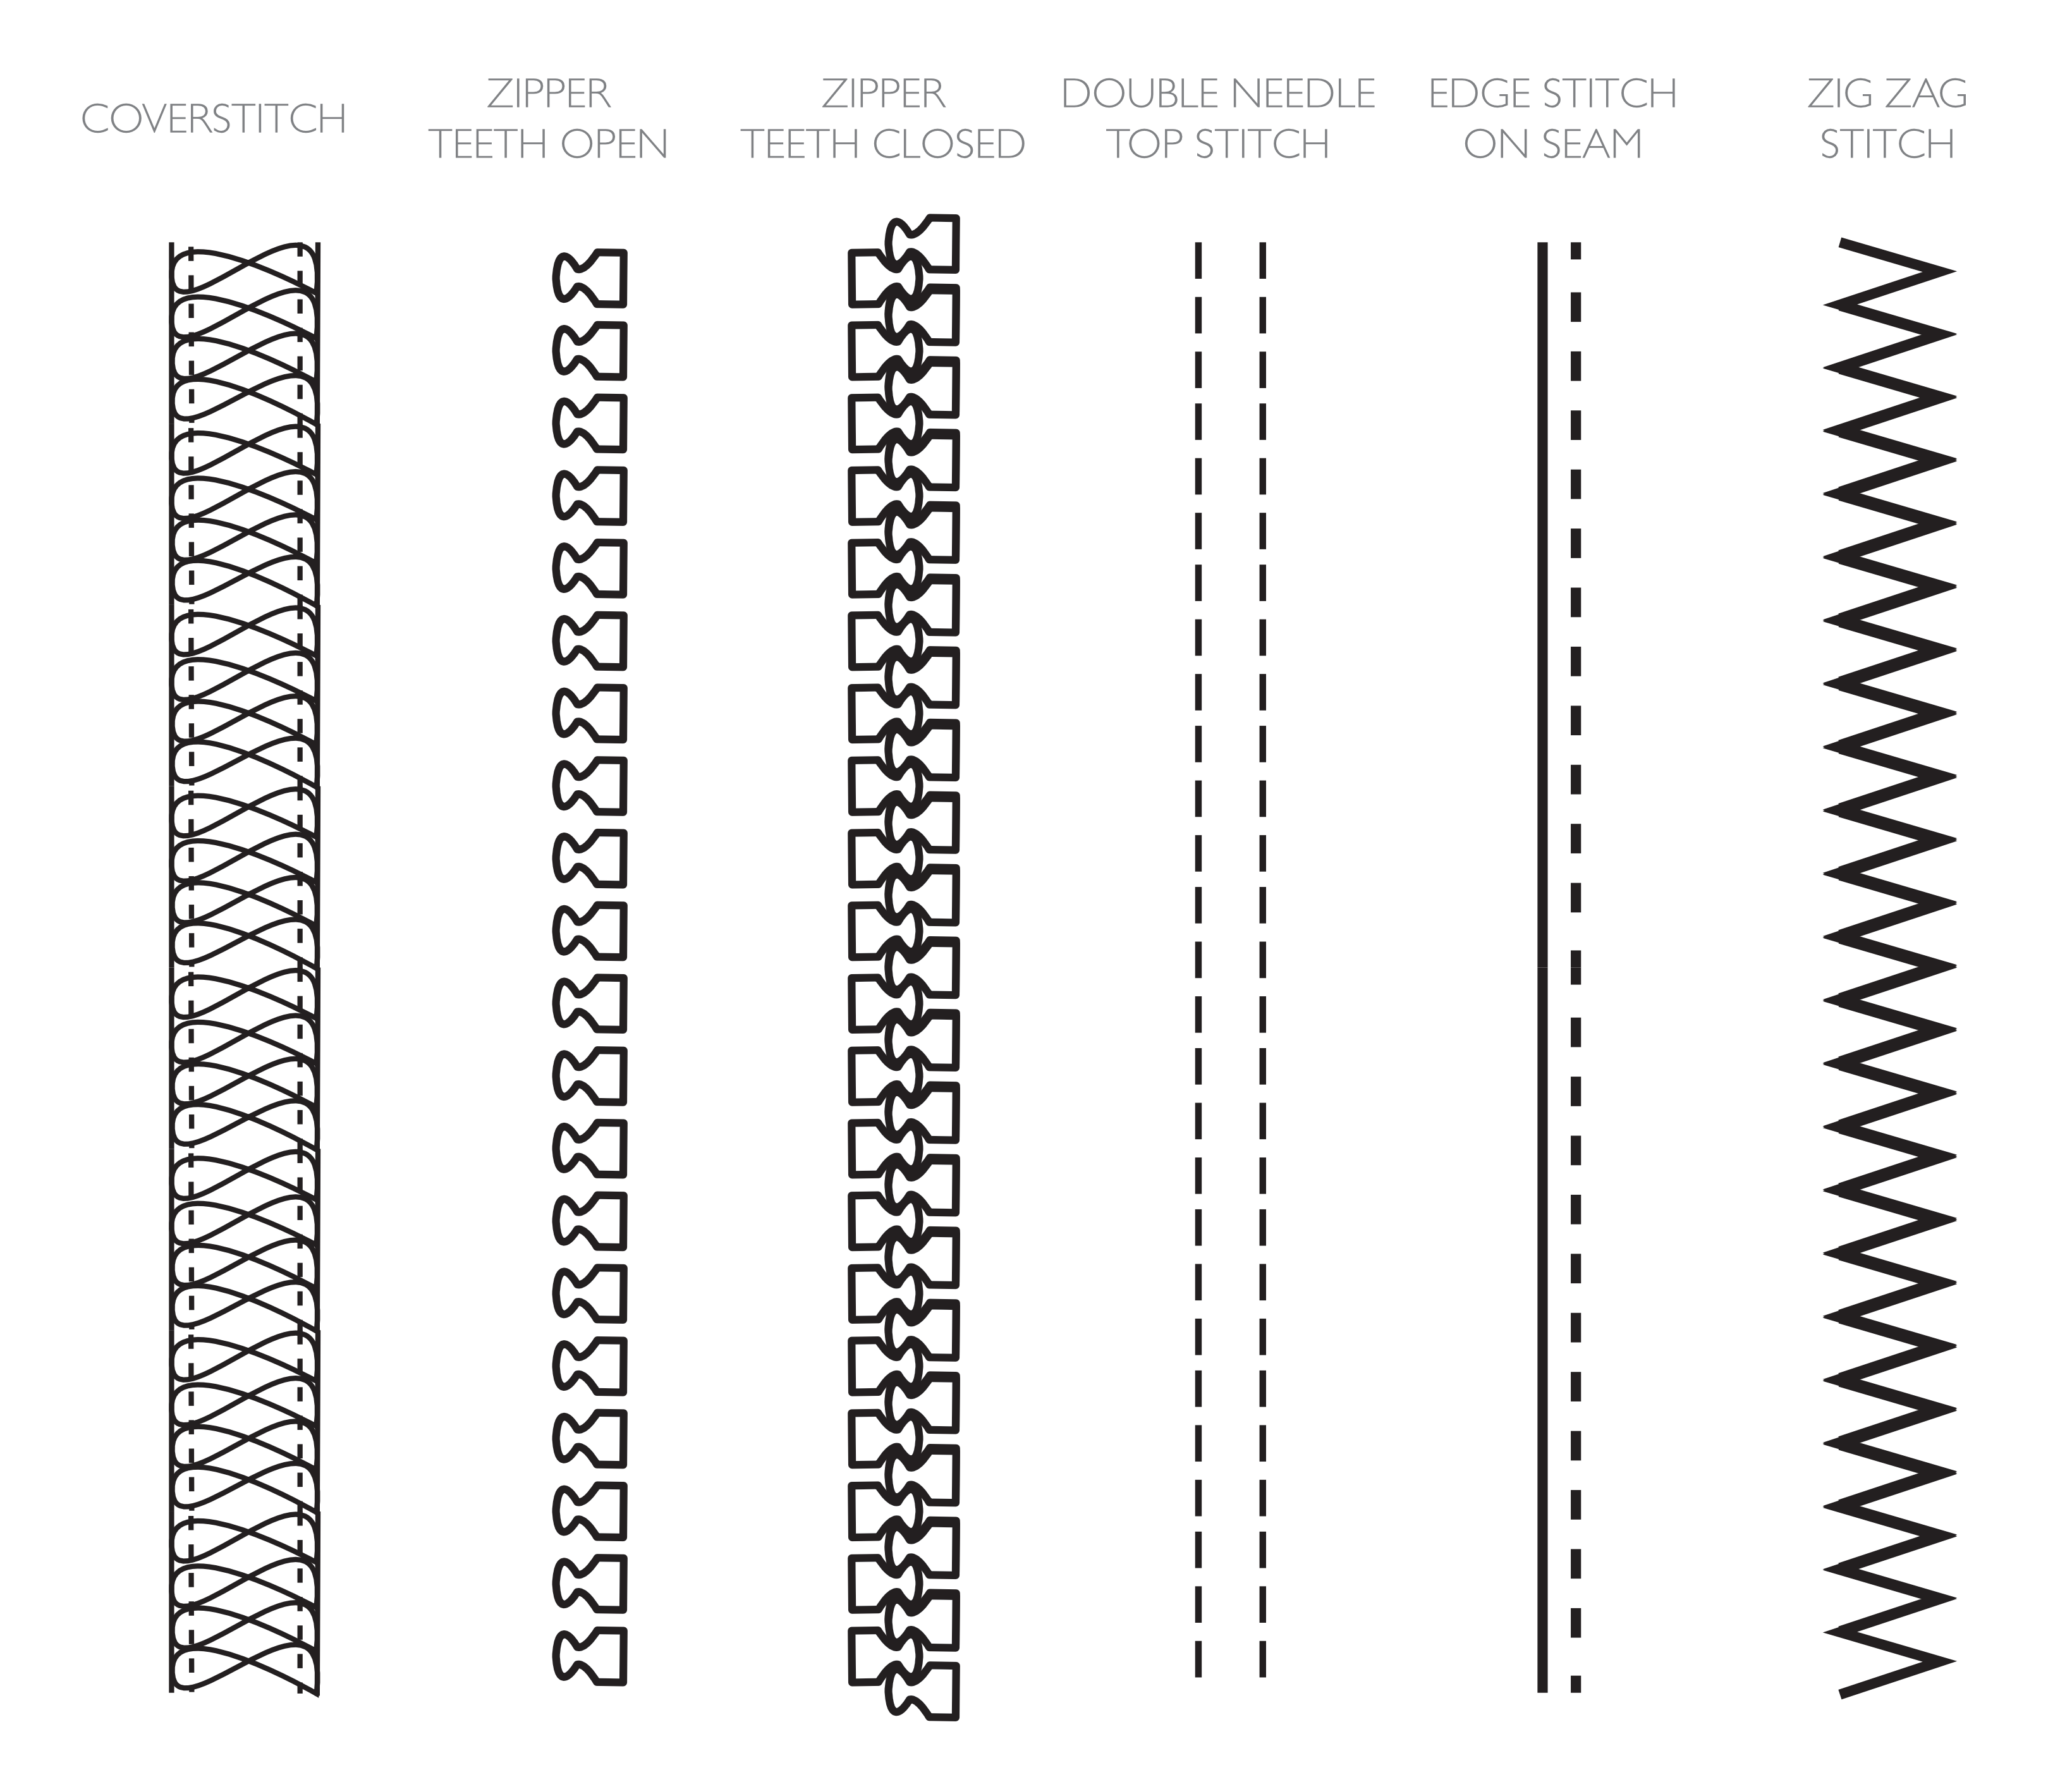 Brushes technical drawings (fashion design) - Resources - Affinity | Forum